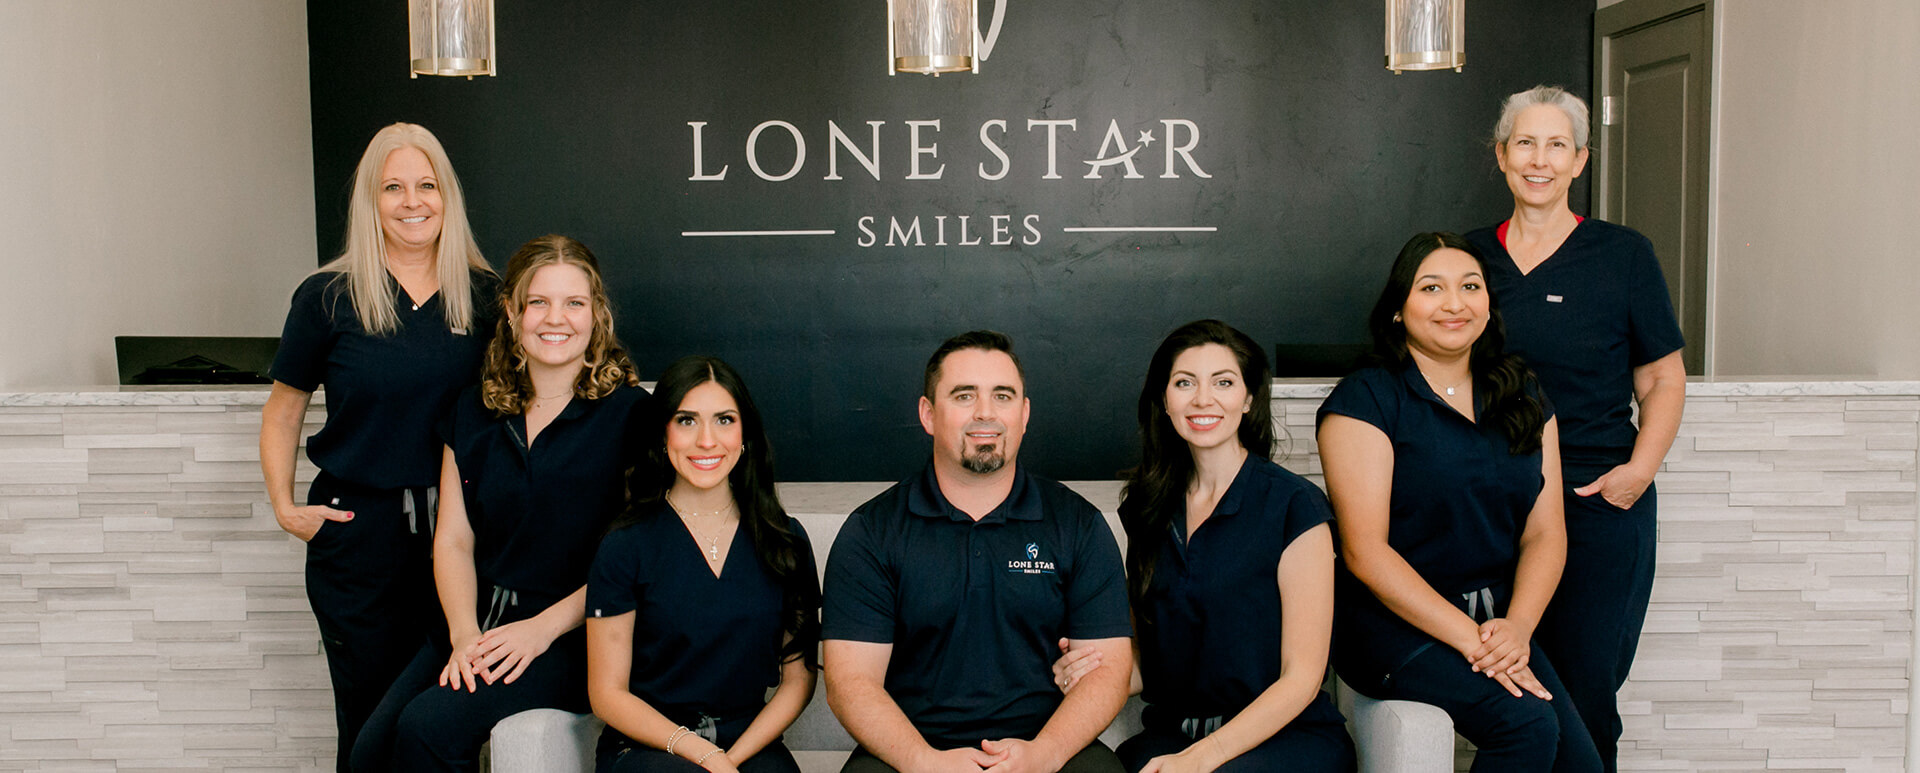 Welcome to Lone Star Smiles - The Lone Star Smiles Team